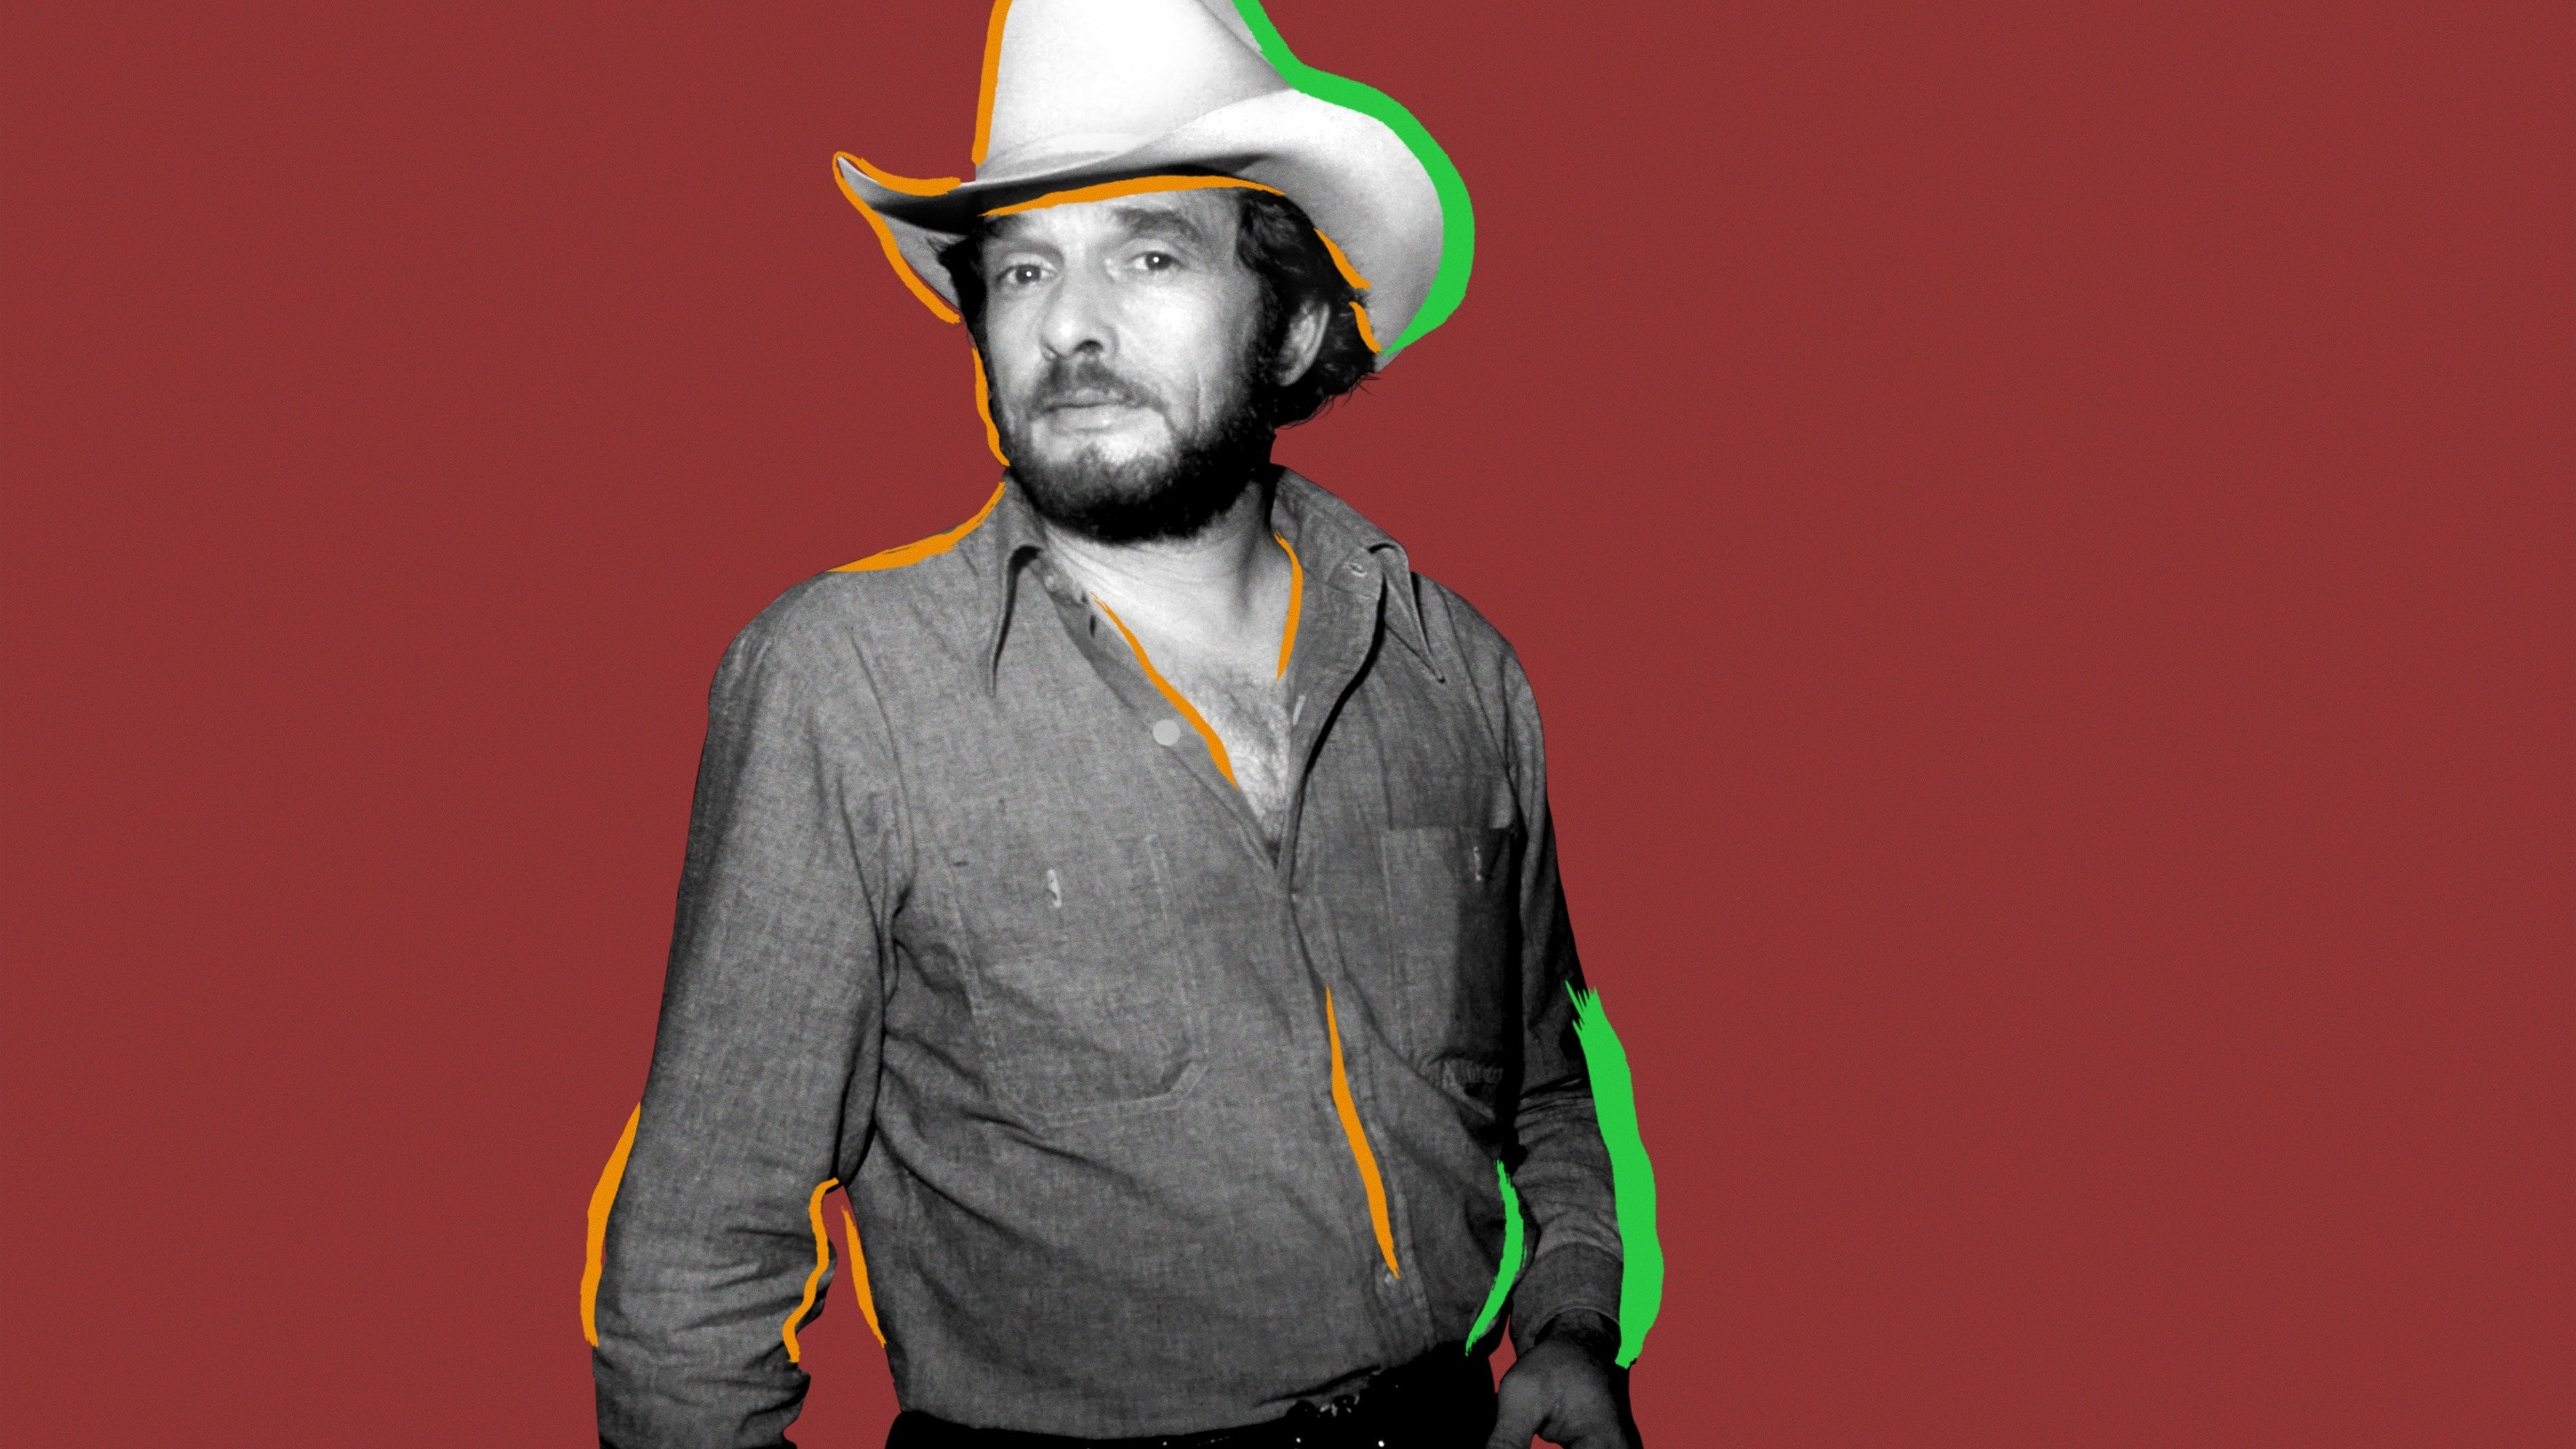 Merle Haggard: Salute to a Country Legend (2020)